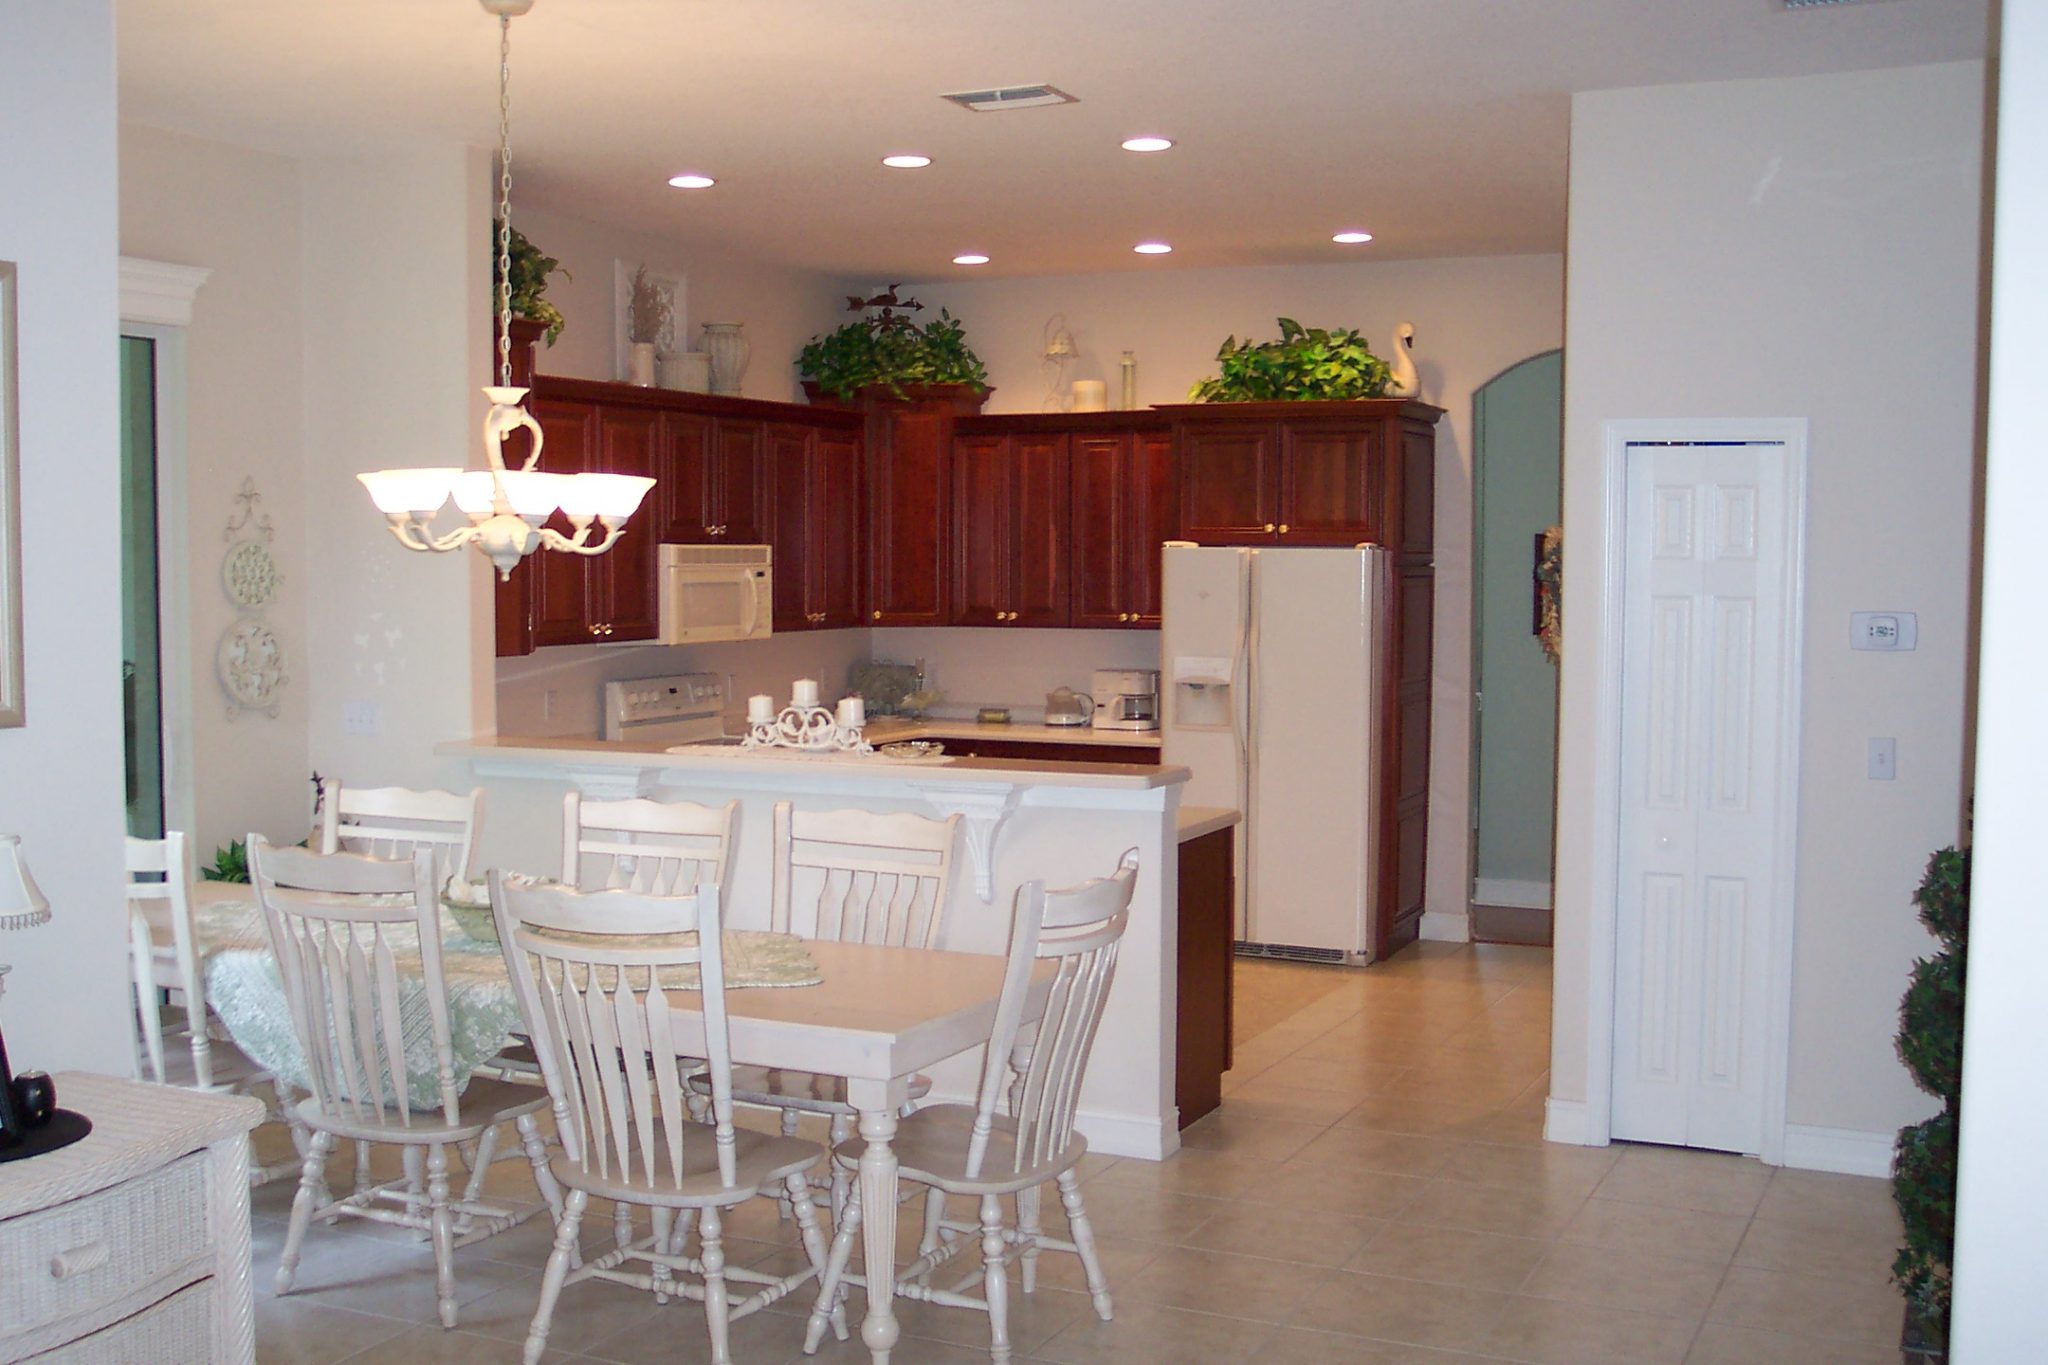 View of Windsor kitchen and breakfast nook.